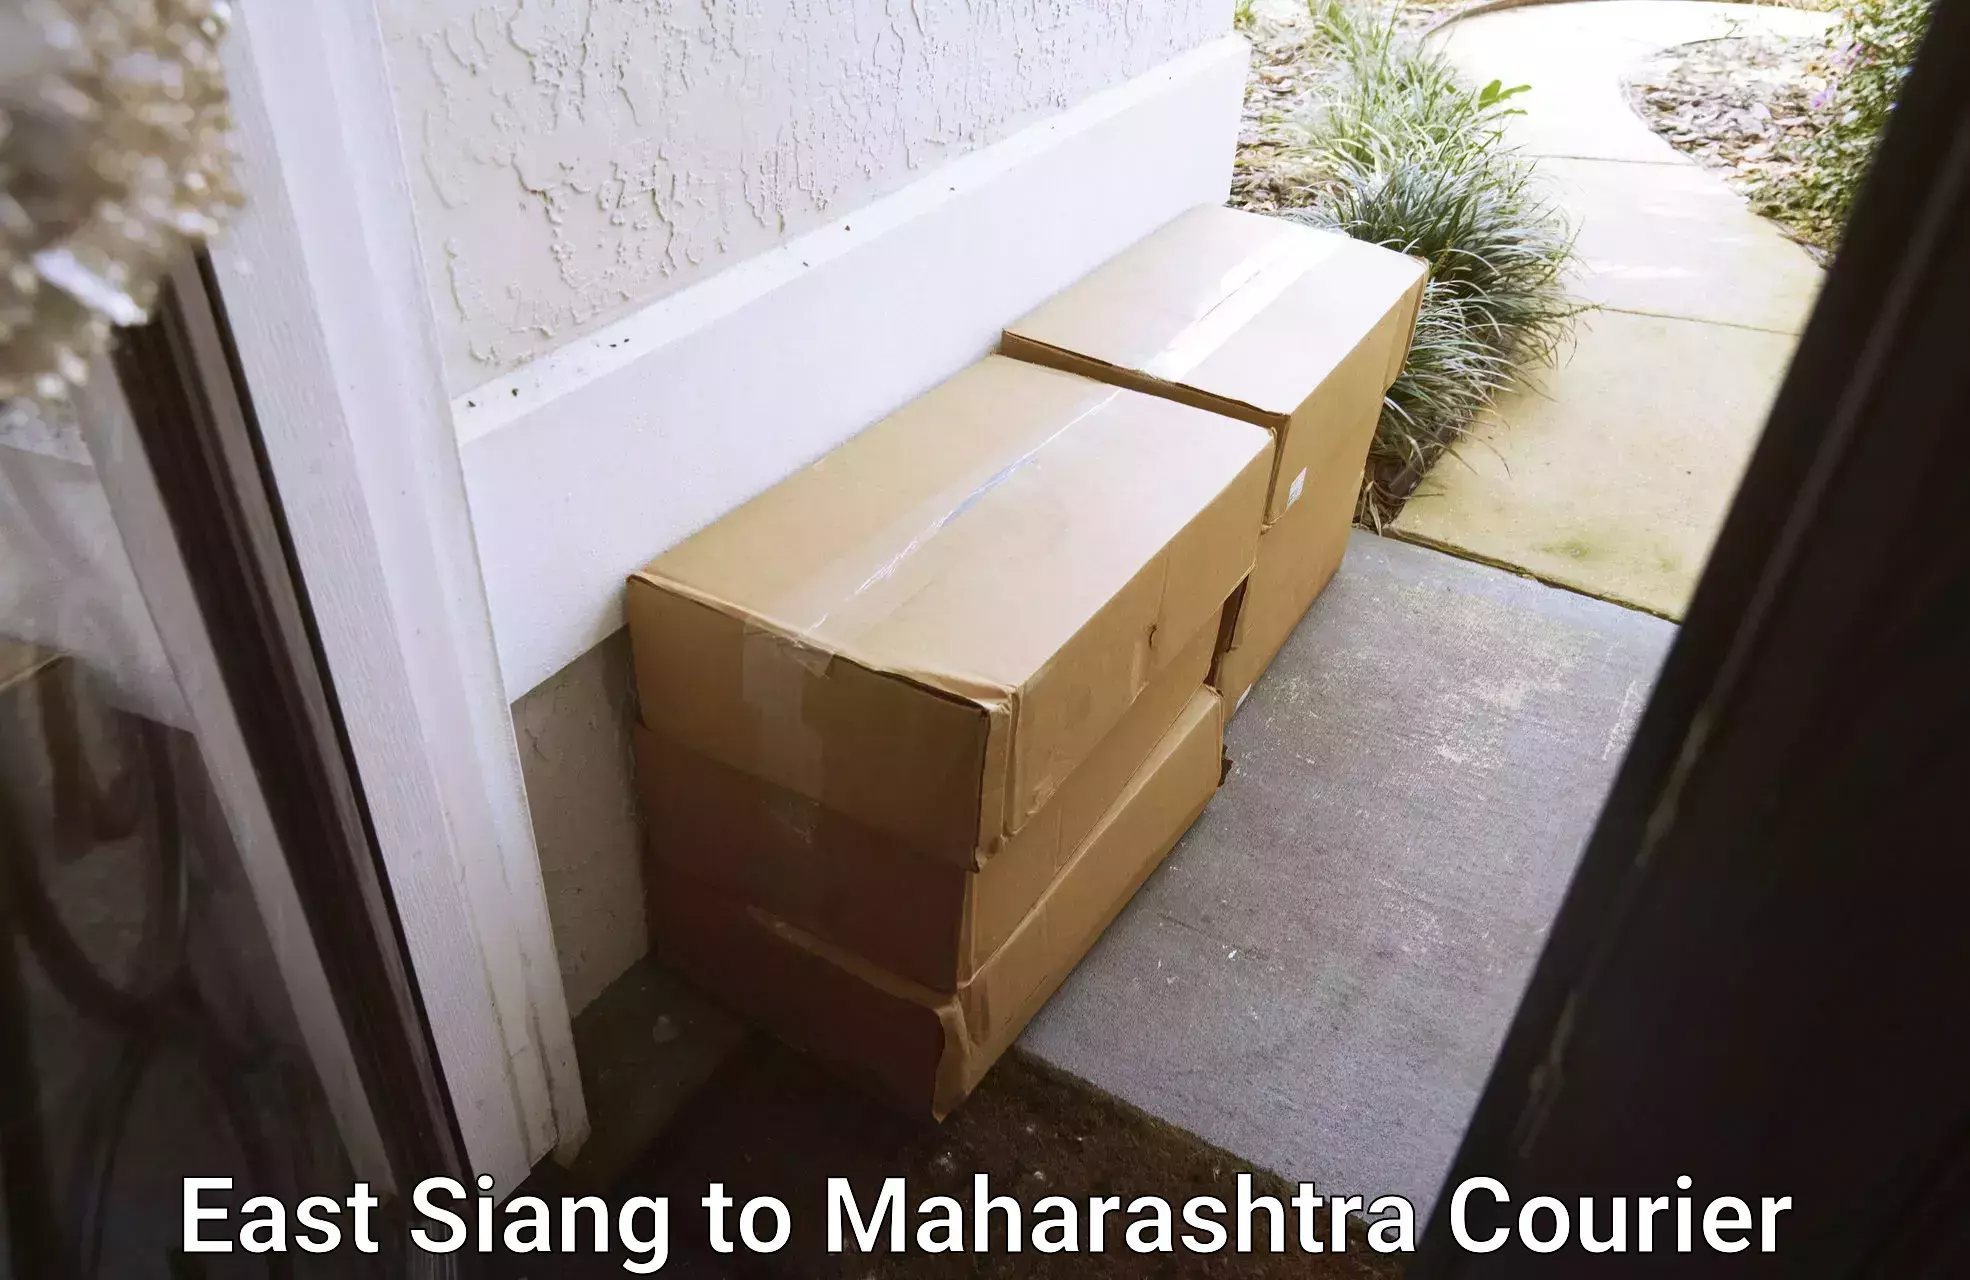 High-capacity parcel service East Siang to Amravati